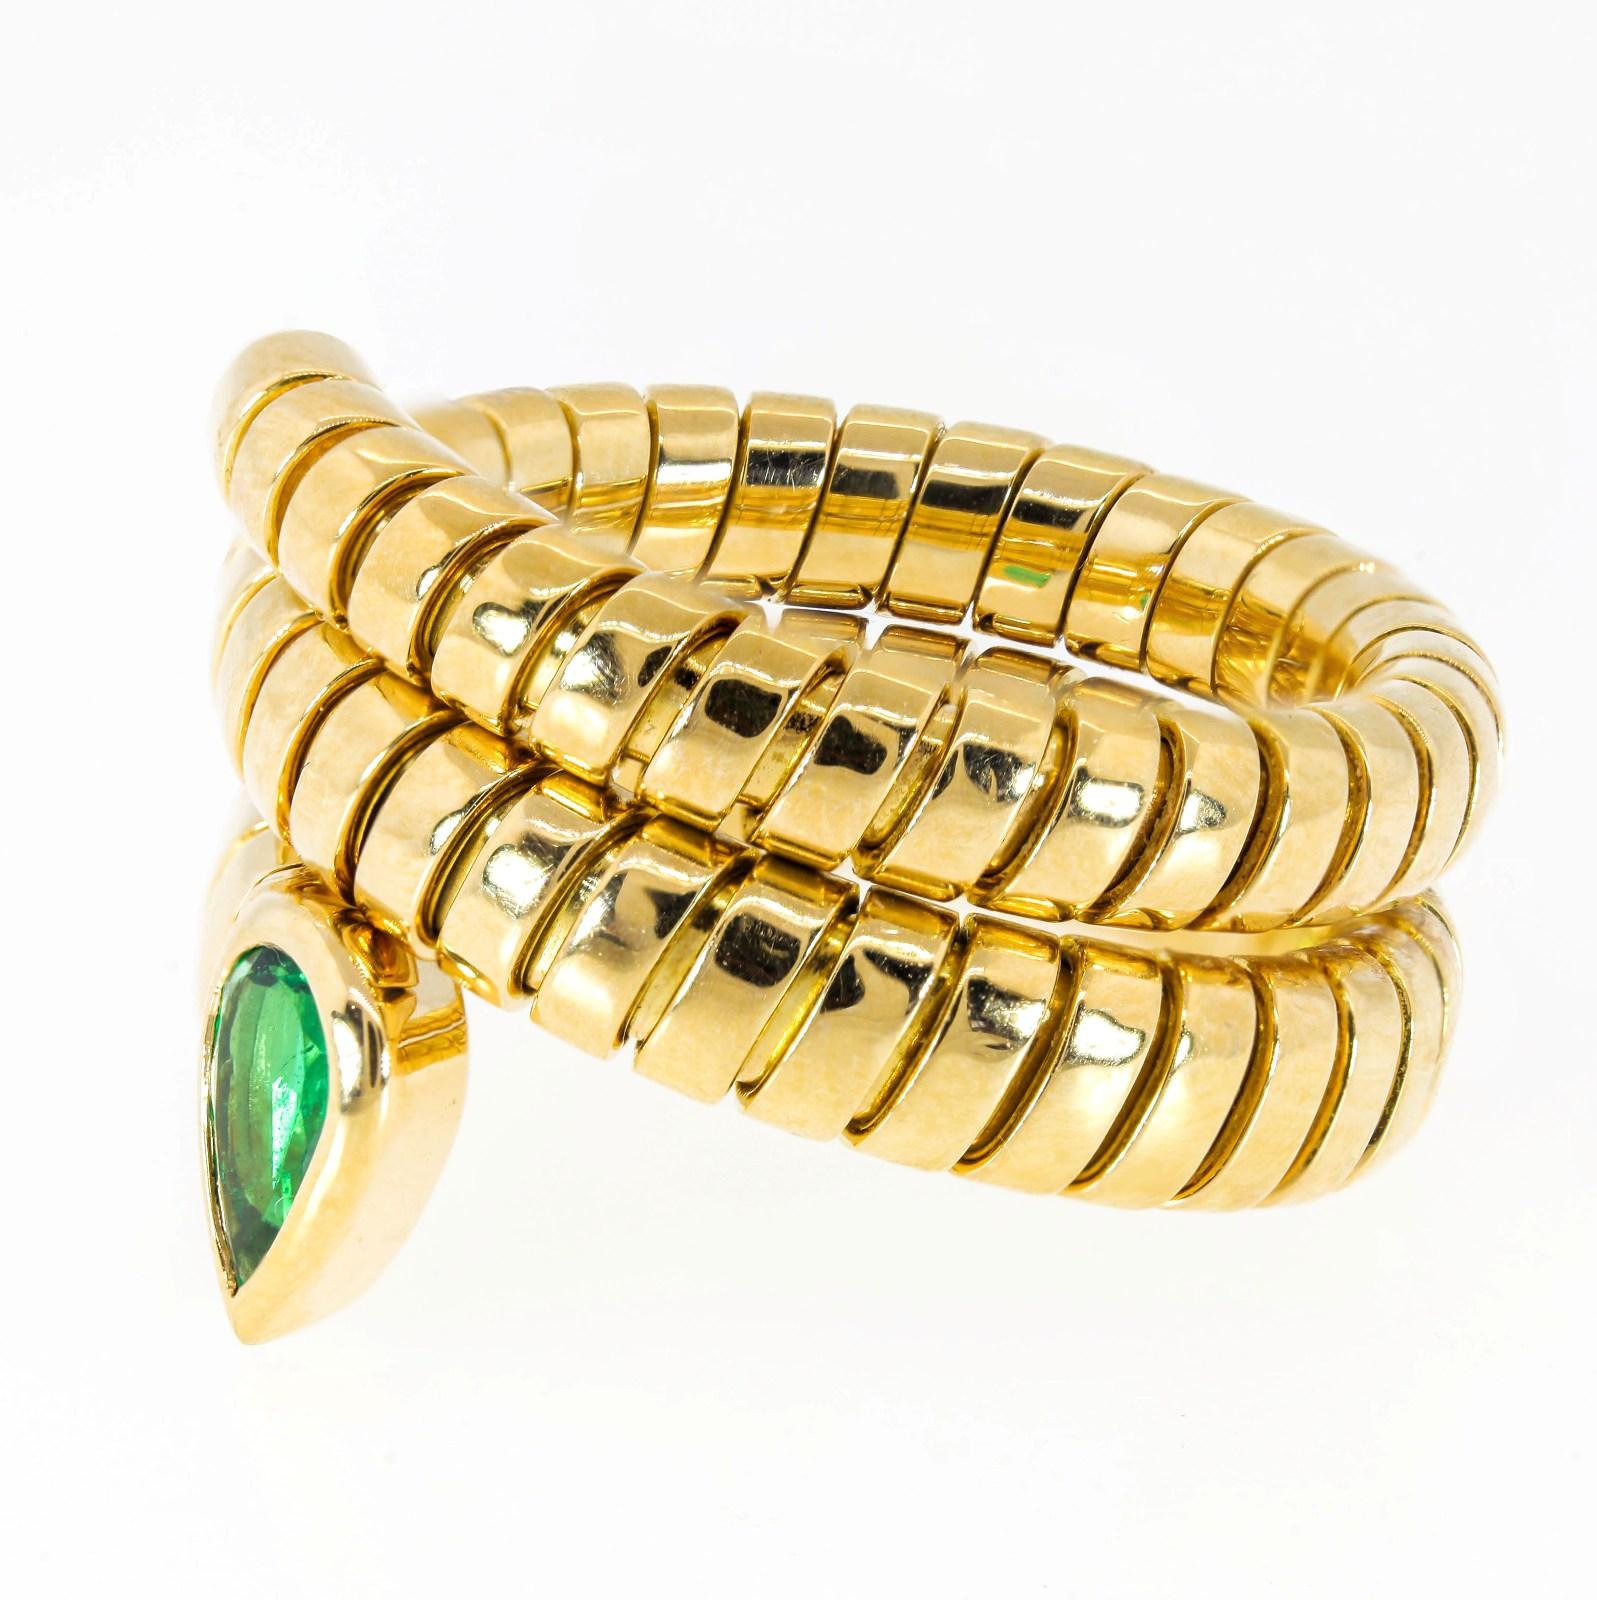 This creation of Bvlgari's classic Tubogas snake ring features a bezel set pear shape Colombian Emerald.  The triple wrap design tapers from the Emerald to the tail.  A cool joy to wear!